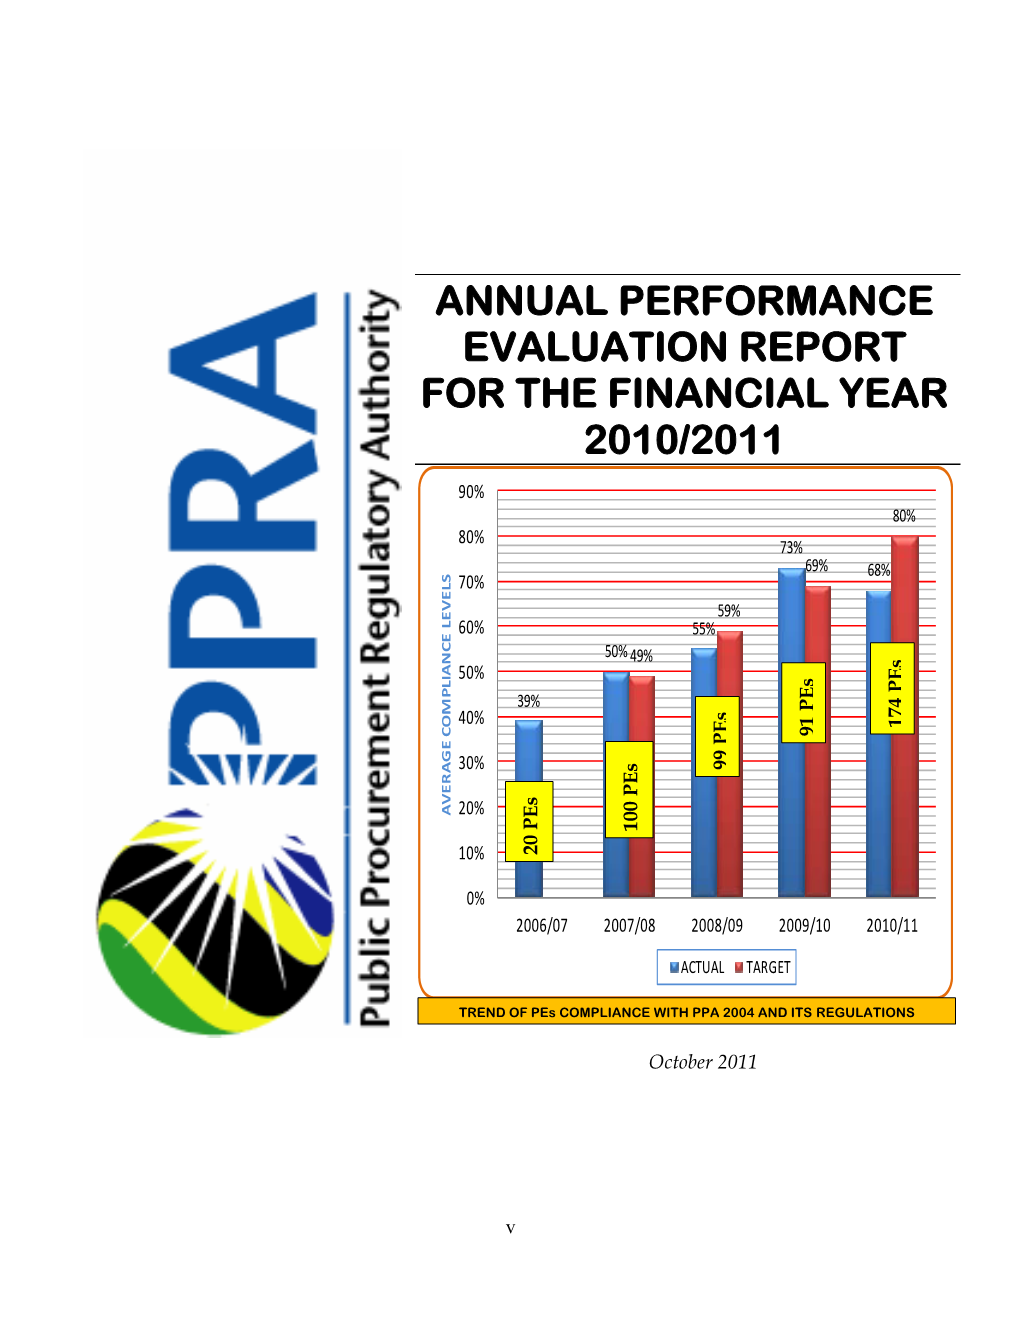 Annual Performance Evaluation Report Financial Year 2010/11